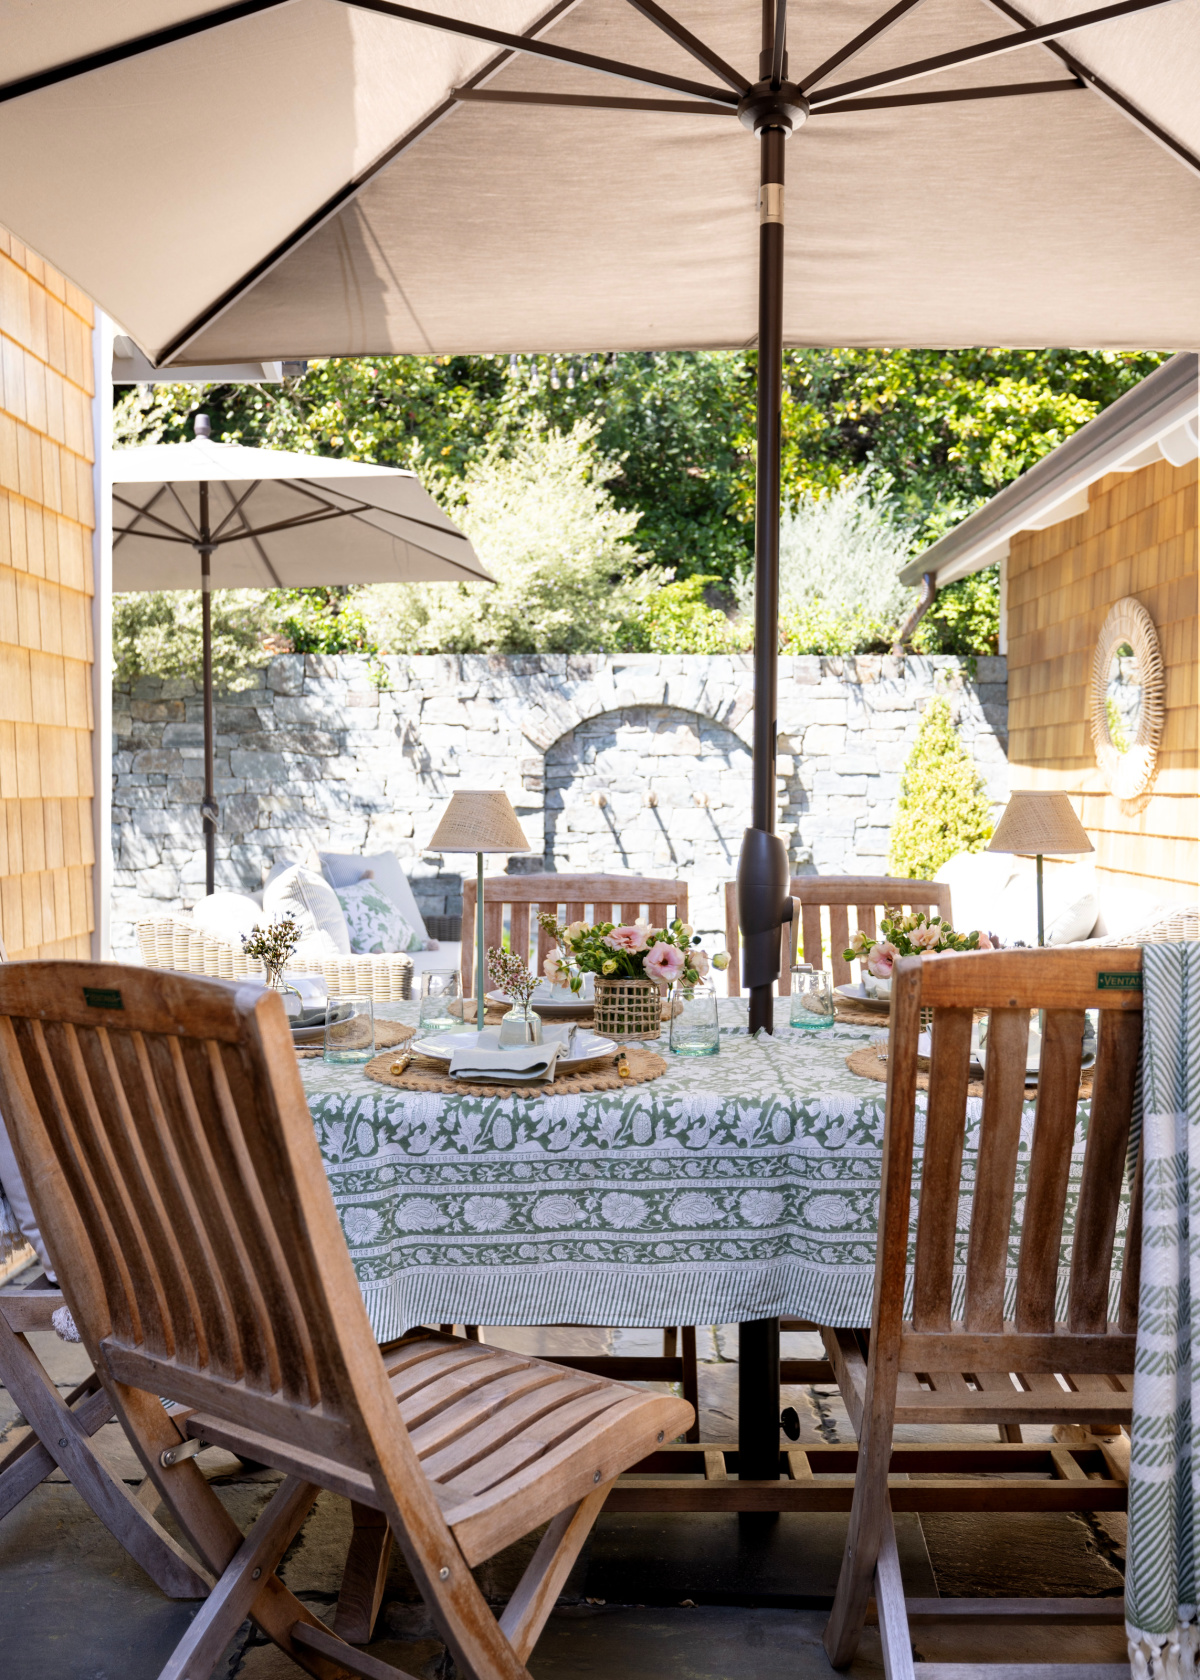 Outdoor table setting in green and white.